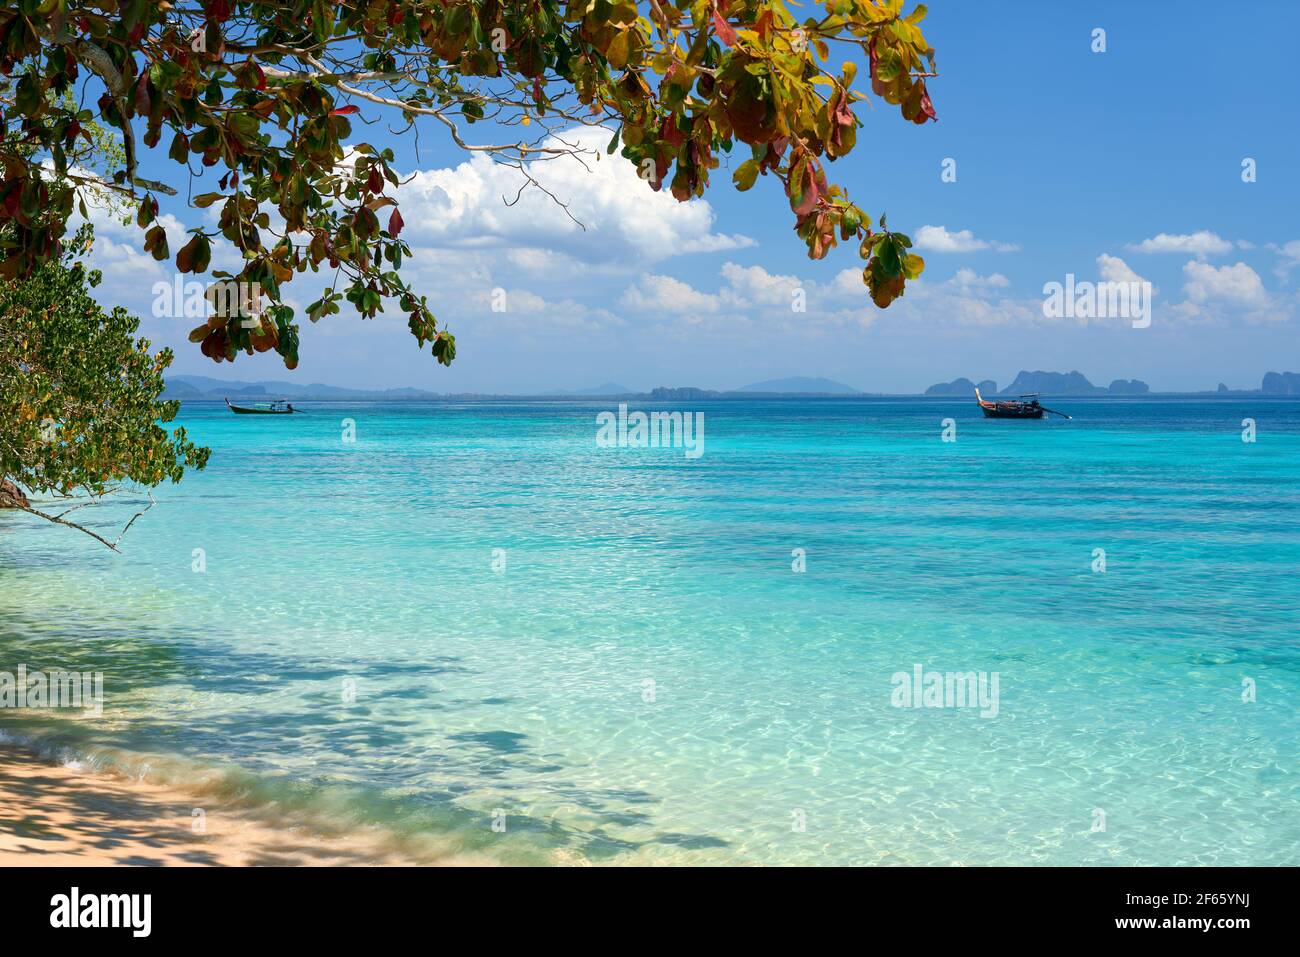 Sea background. Tropical island nature. Vacation travel destination, summer concept Stock Photo